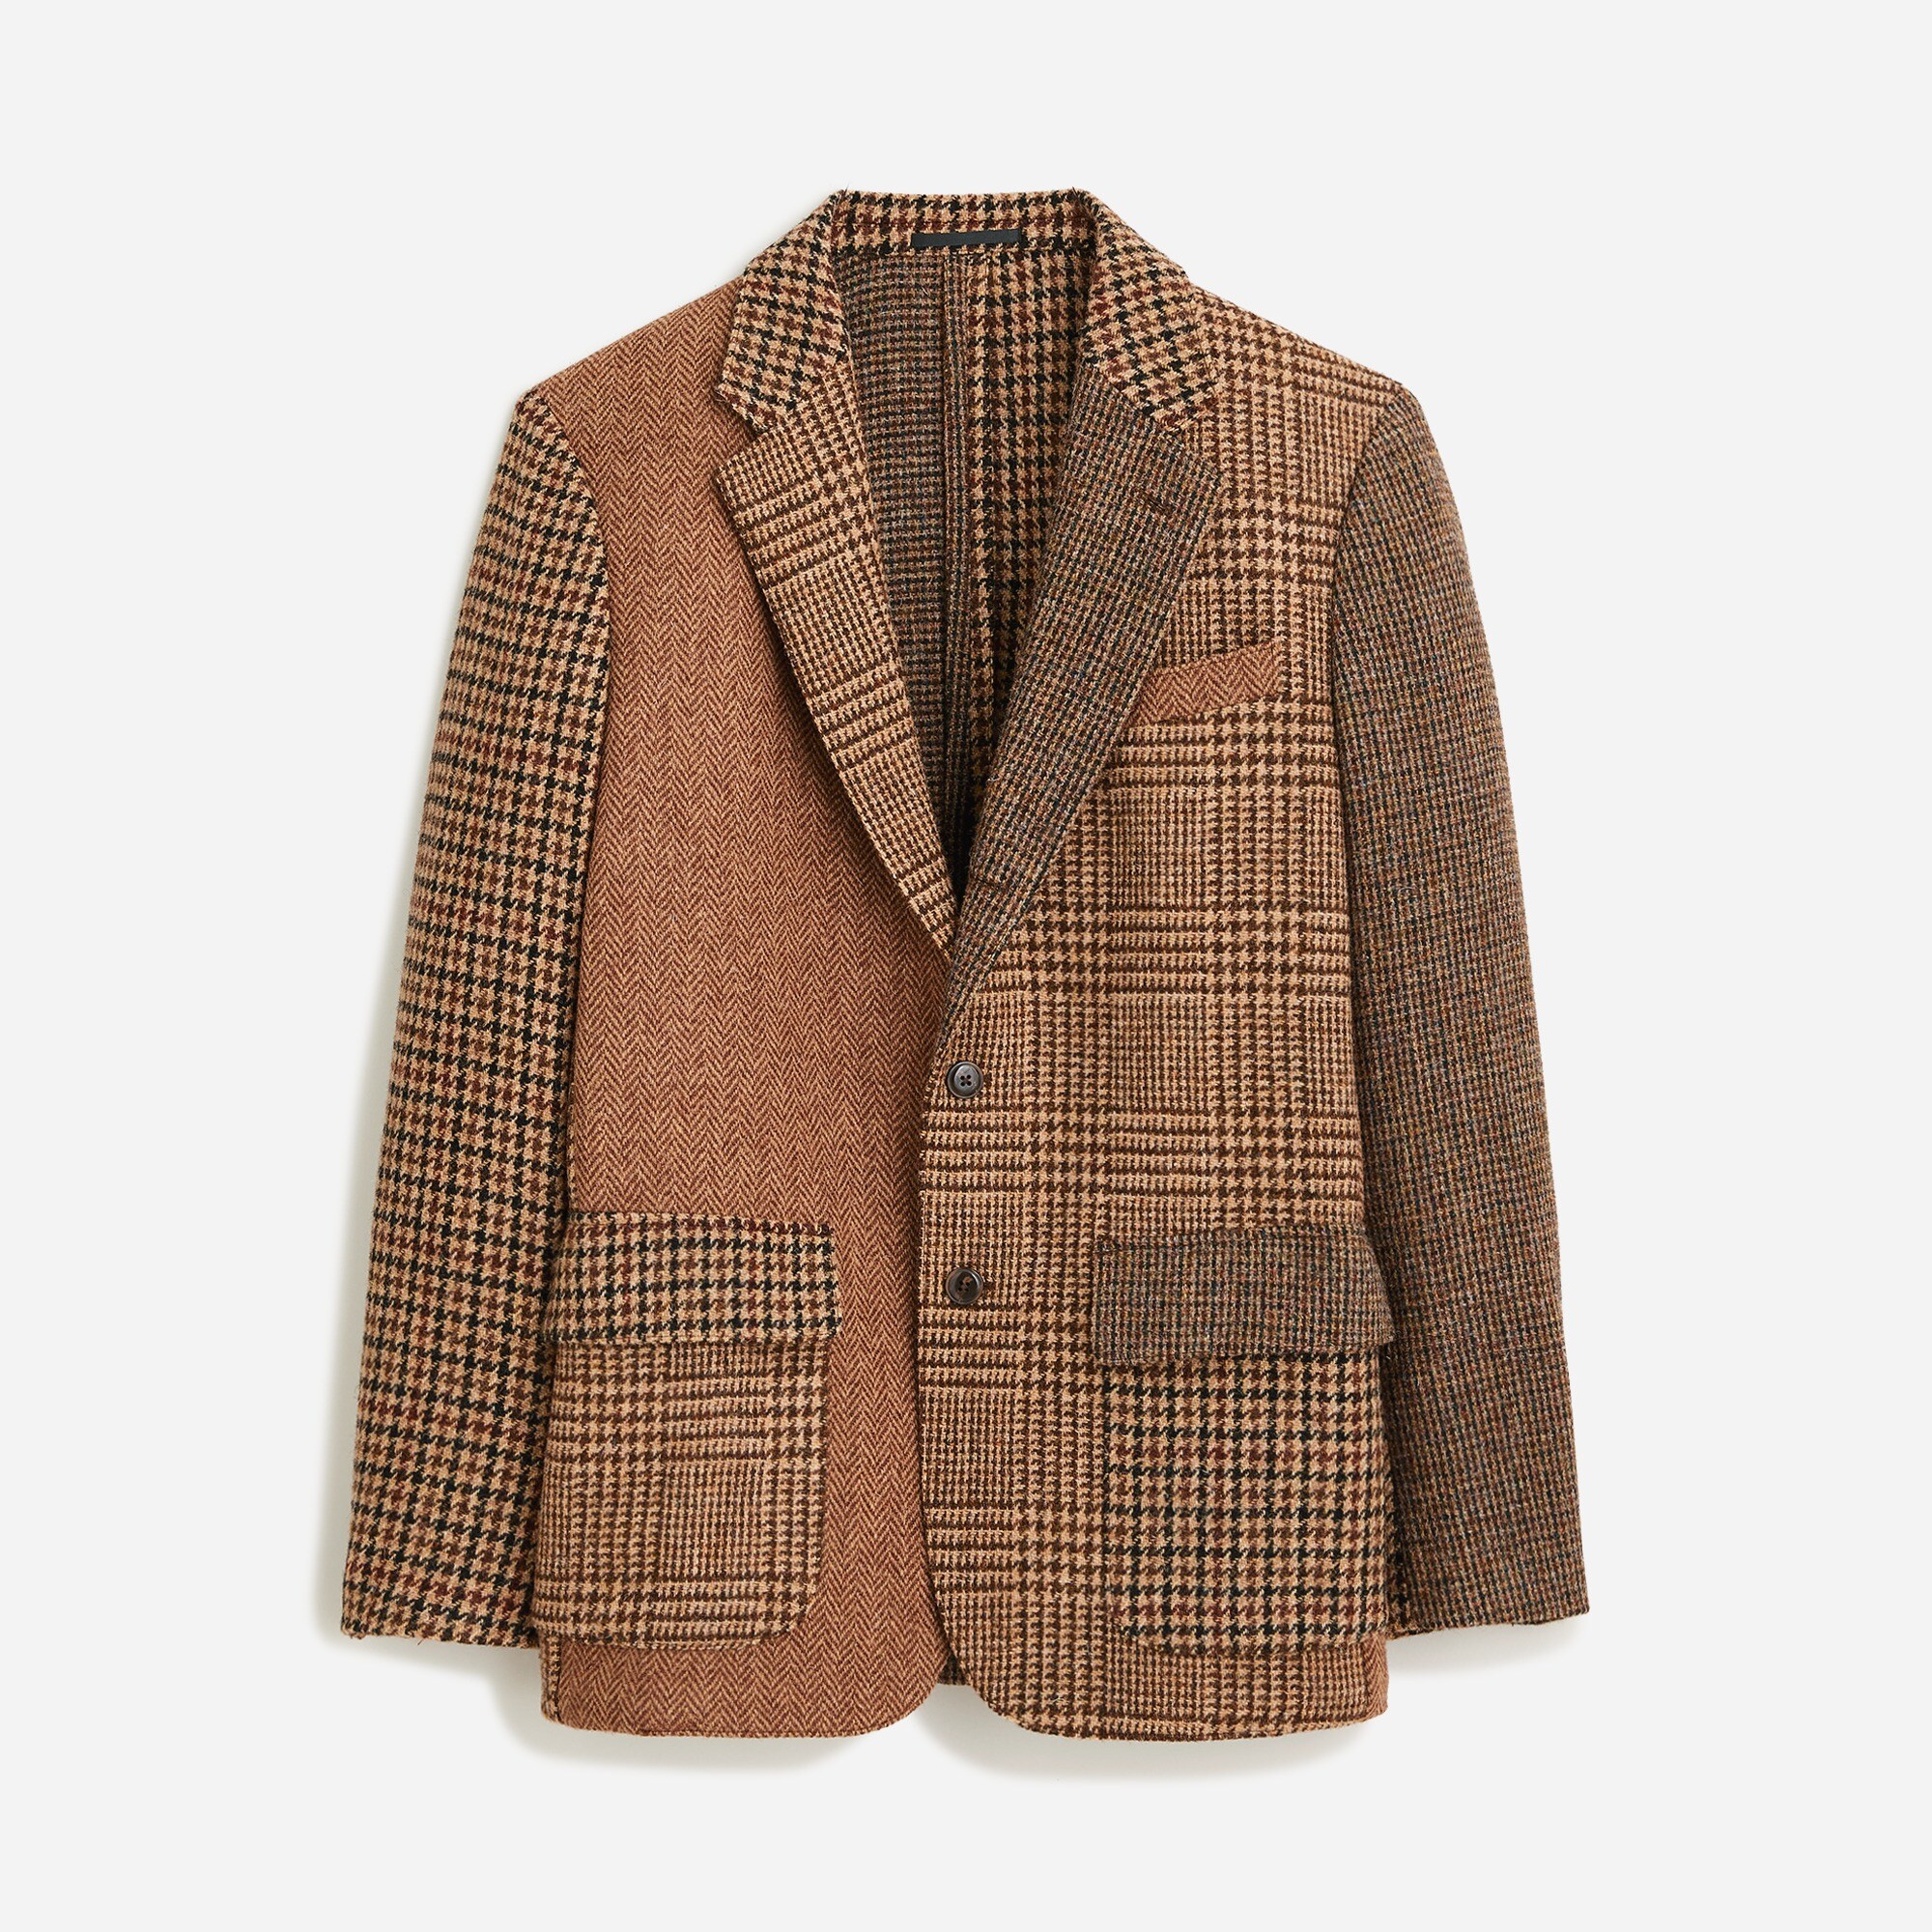  Limited-edition Kenmare Relaxed-fit blazer in Scottish wool